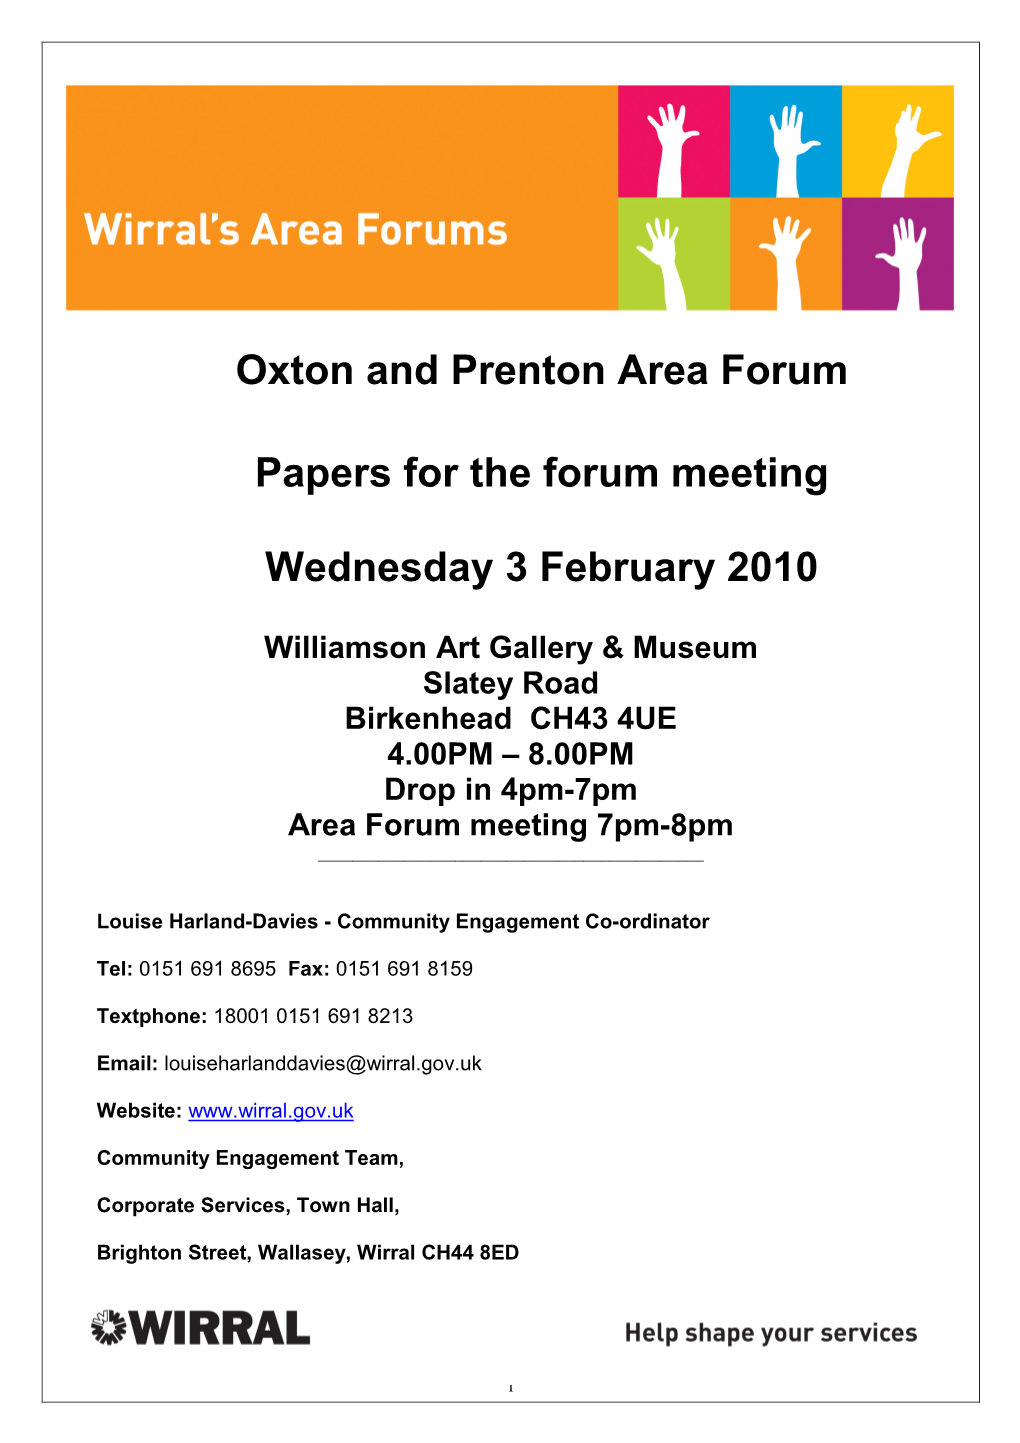 Oxton and Prenton Area Forum Papers for the Forum Meeting Wednesday 3 February 2010